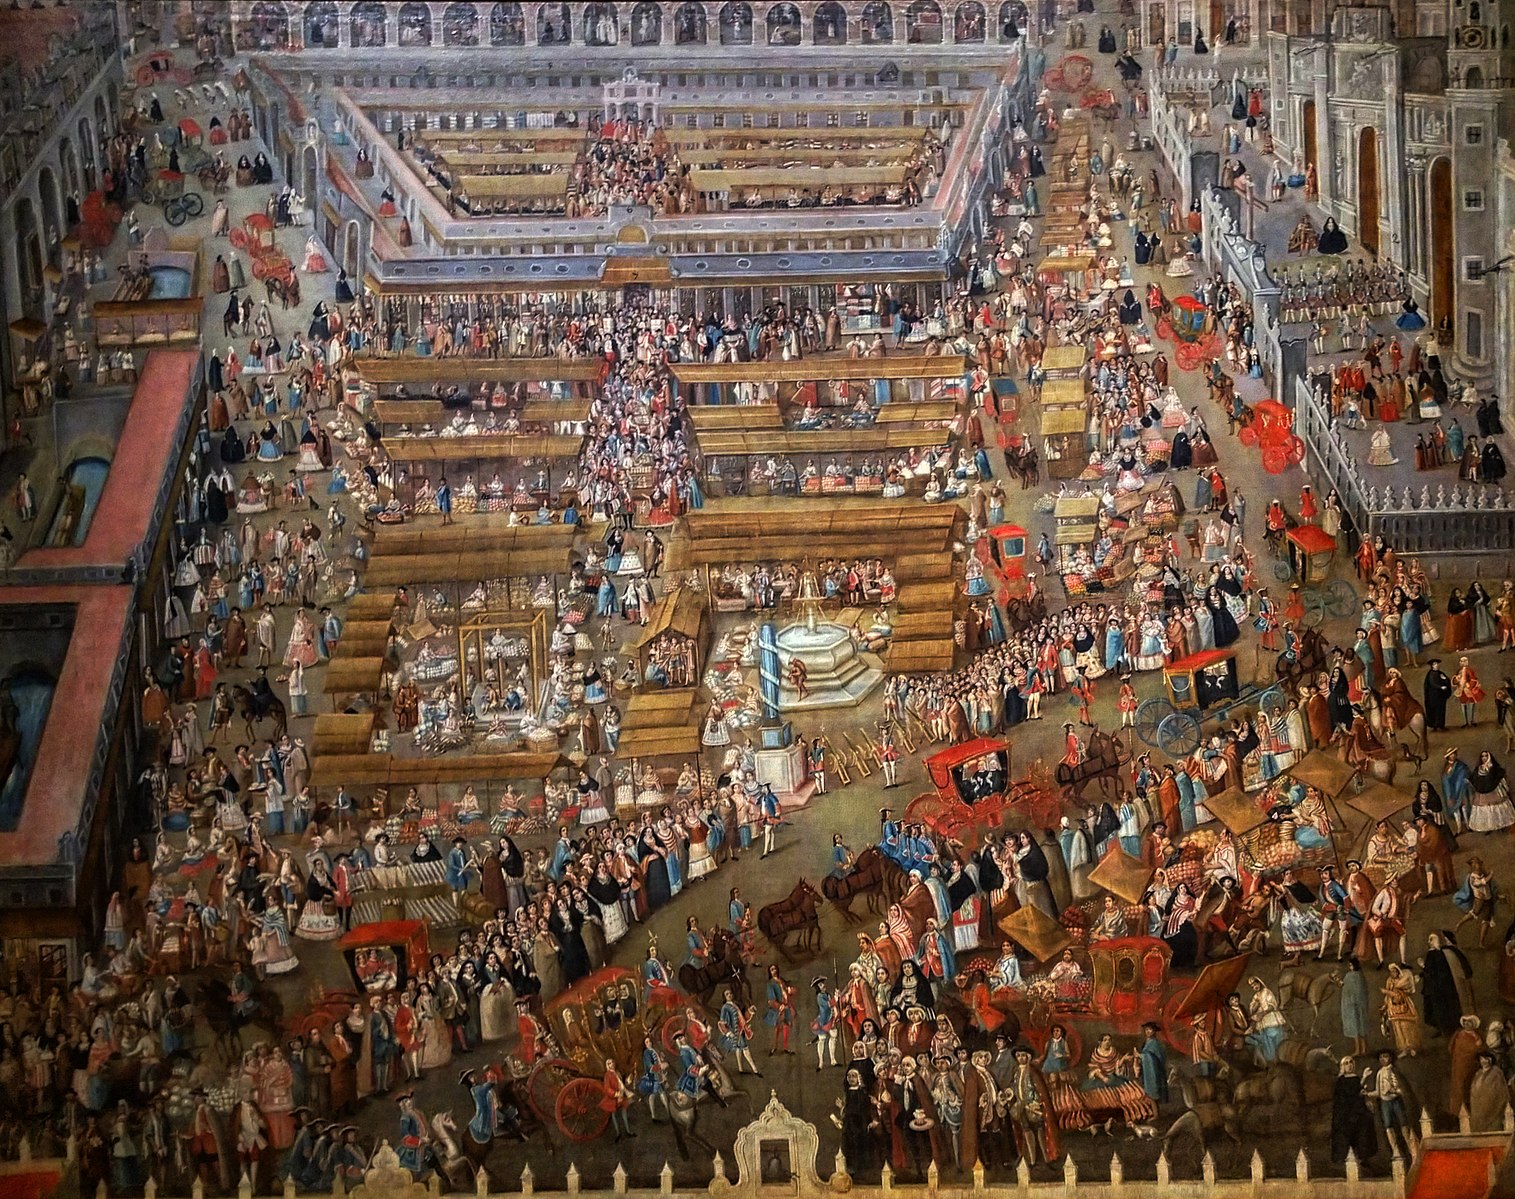 A very detailed scene of a market place in the center of town from a birds eye